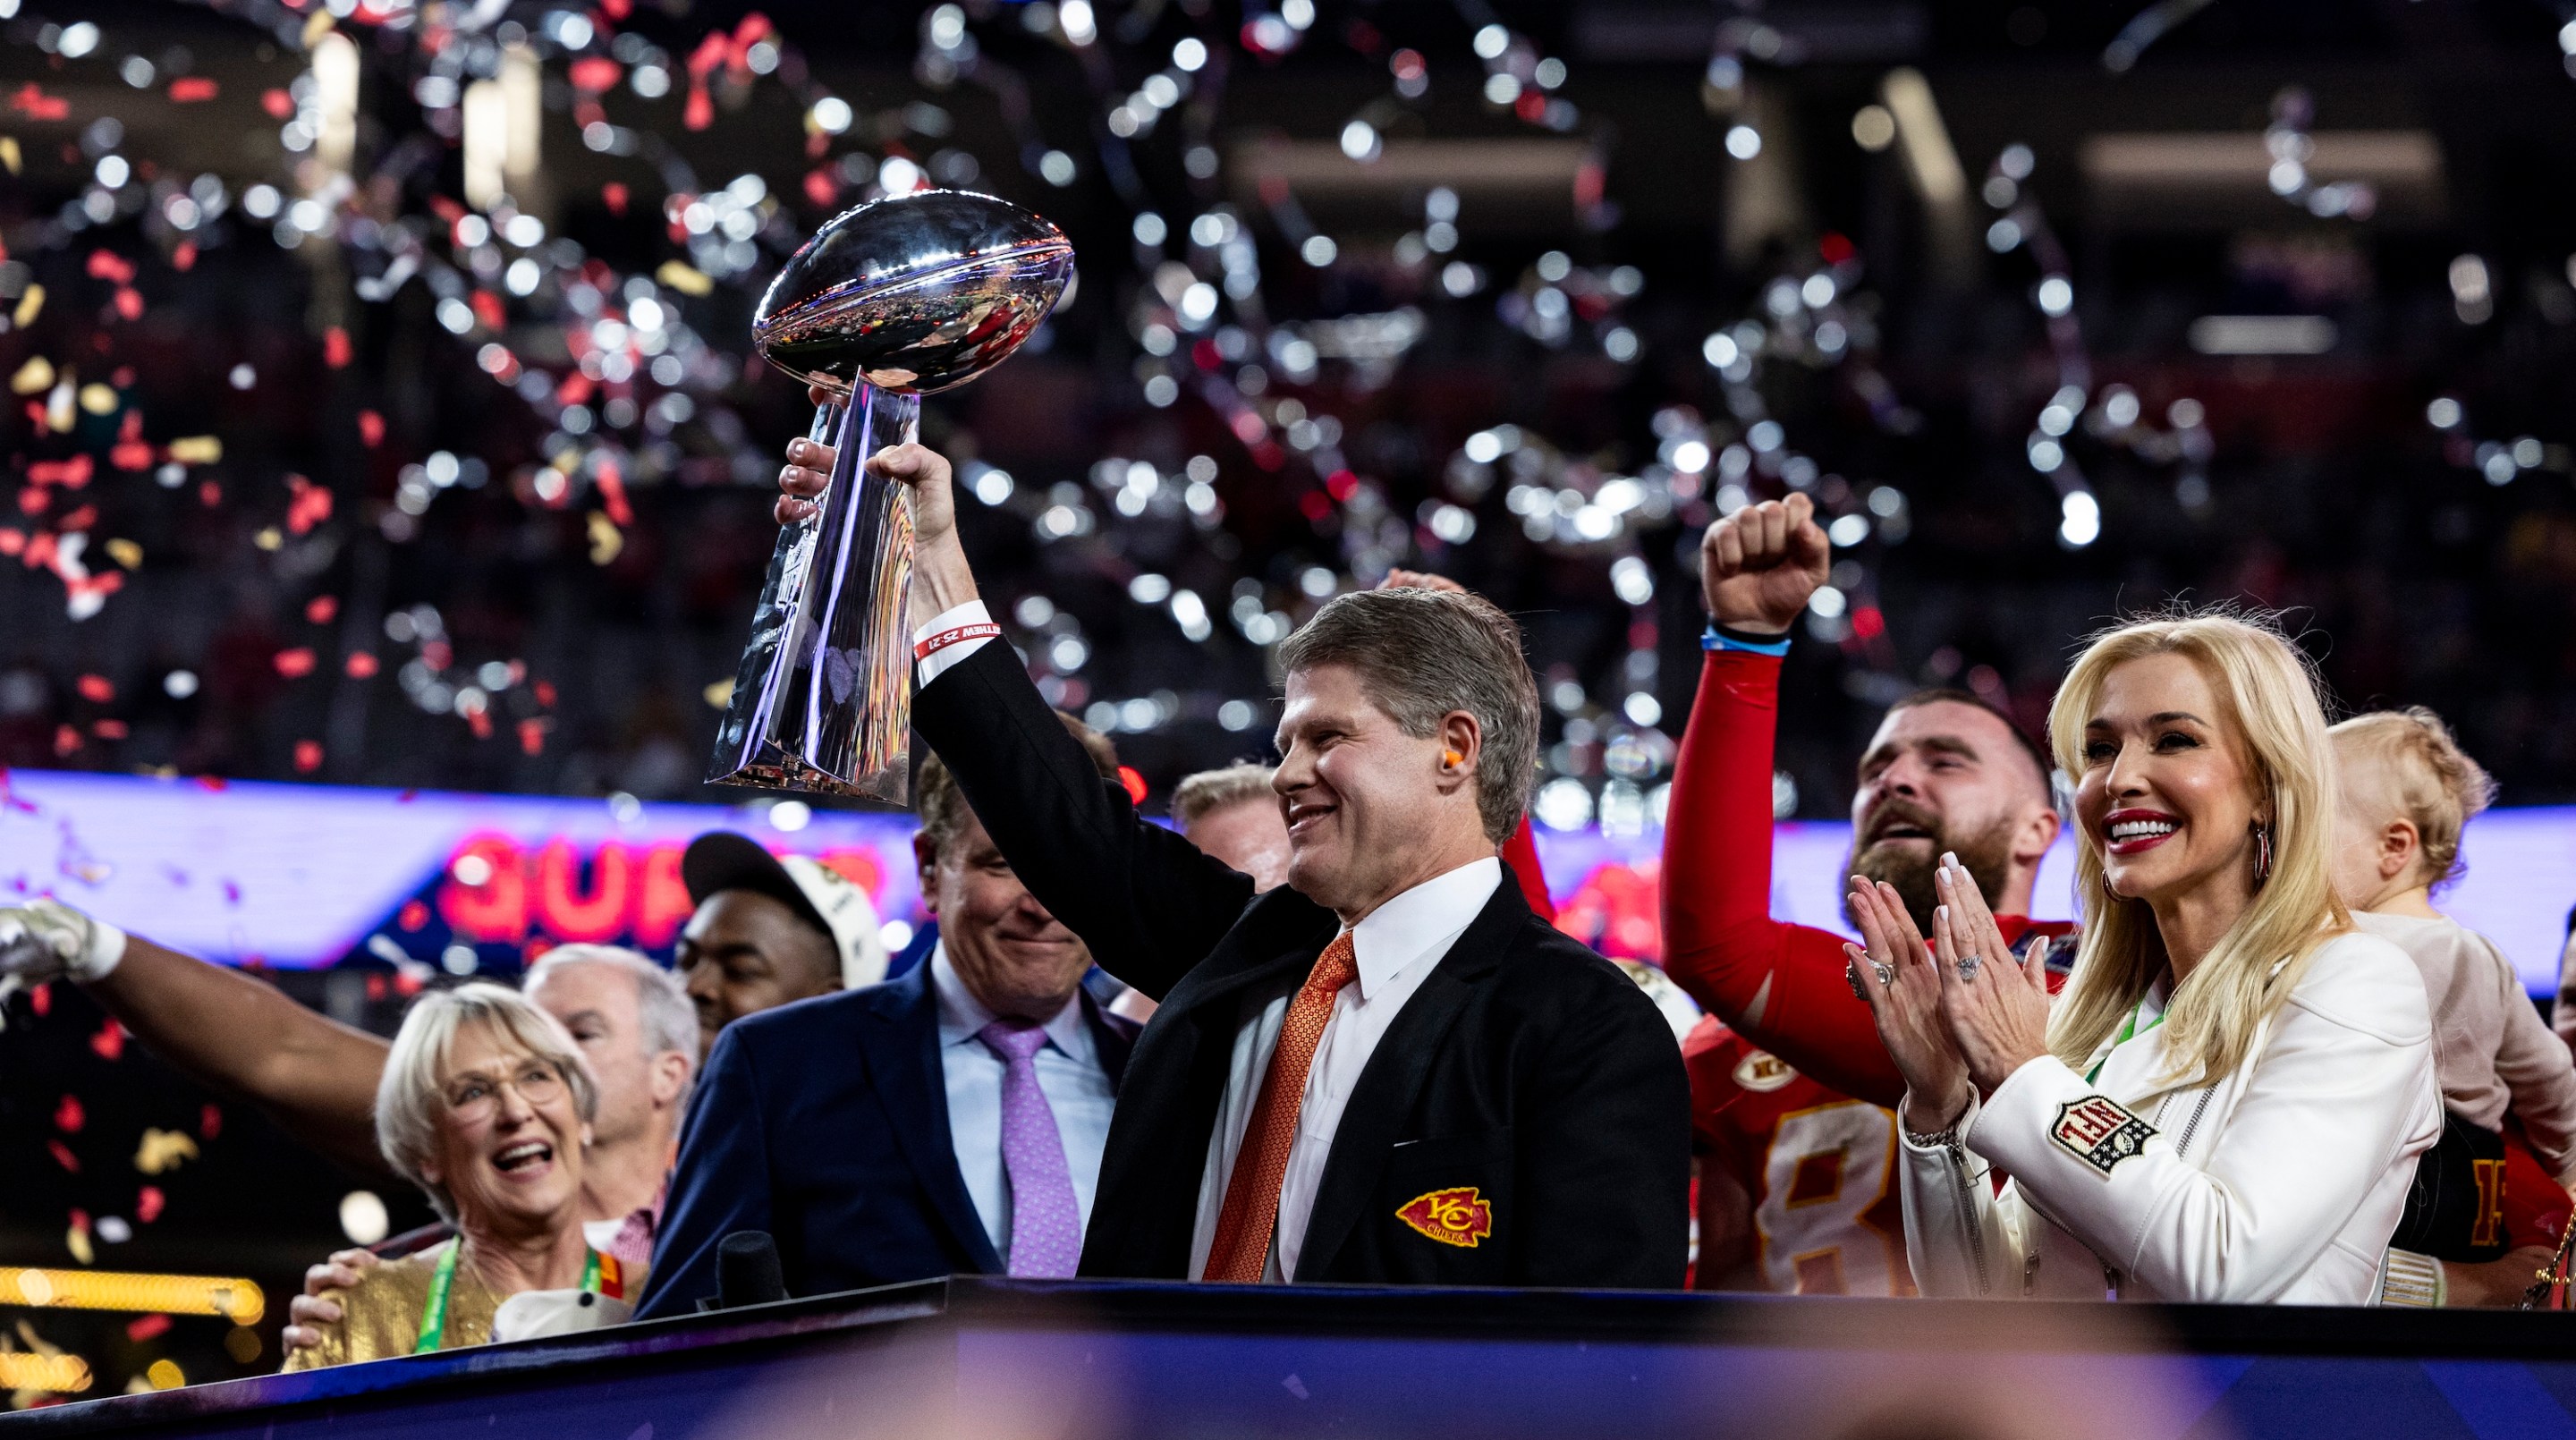 LAS VEGAS, NEVADA - FEBRUARY 11: Clark Hunt owner of the Kansas City Chiefs celebrates after winning Super Bowl LVIII against the San Francisco 49ers at Allegiant Stadium on Sunday, February 11, 2024 in Las Vegas, Nevada. (Photo by Lauren Leigh Bacho/Getty Images)